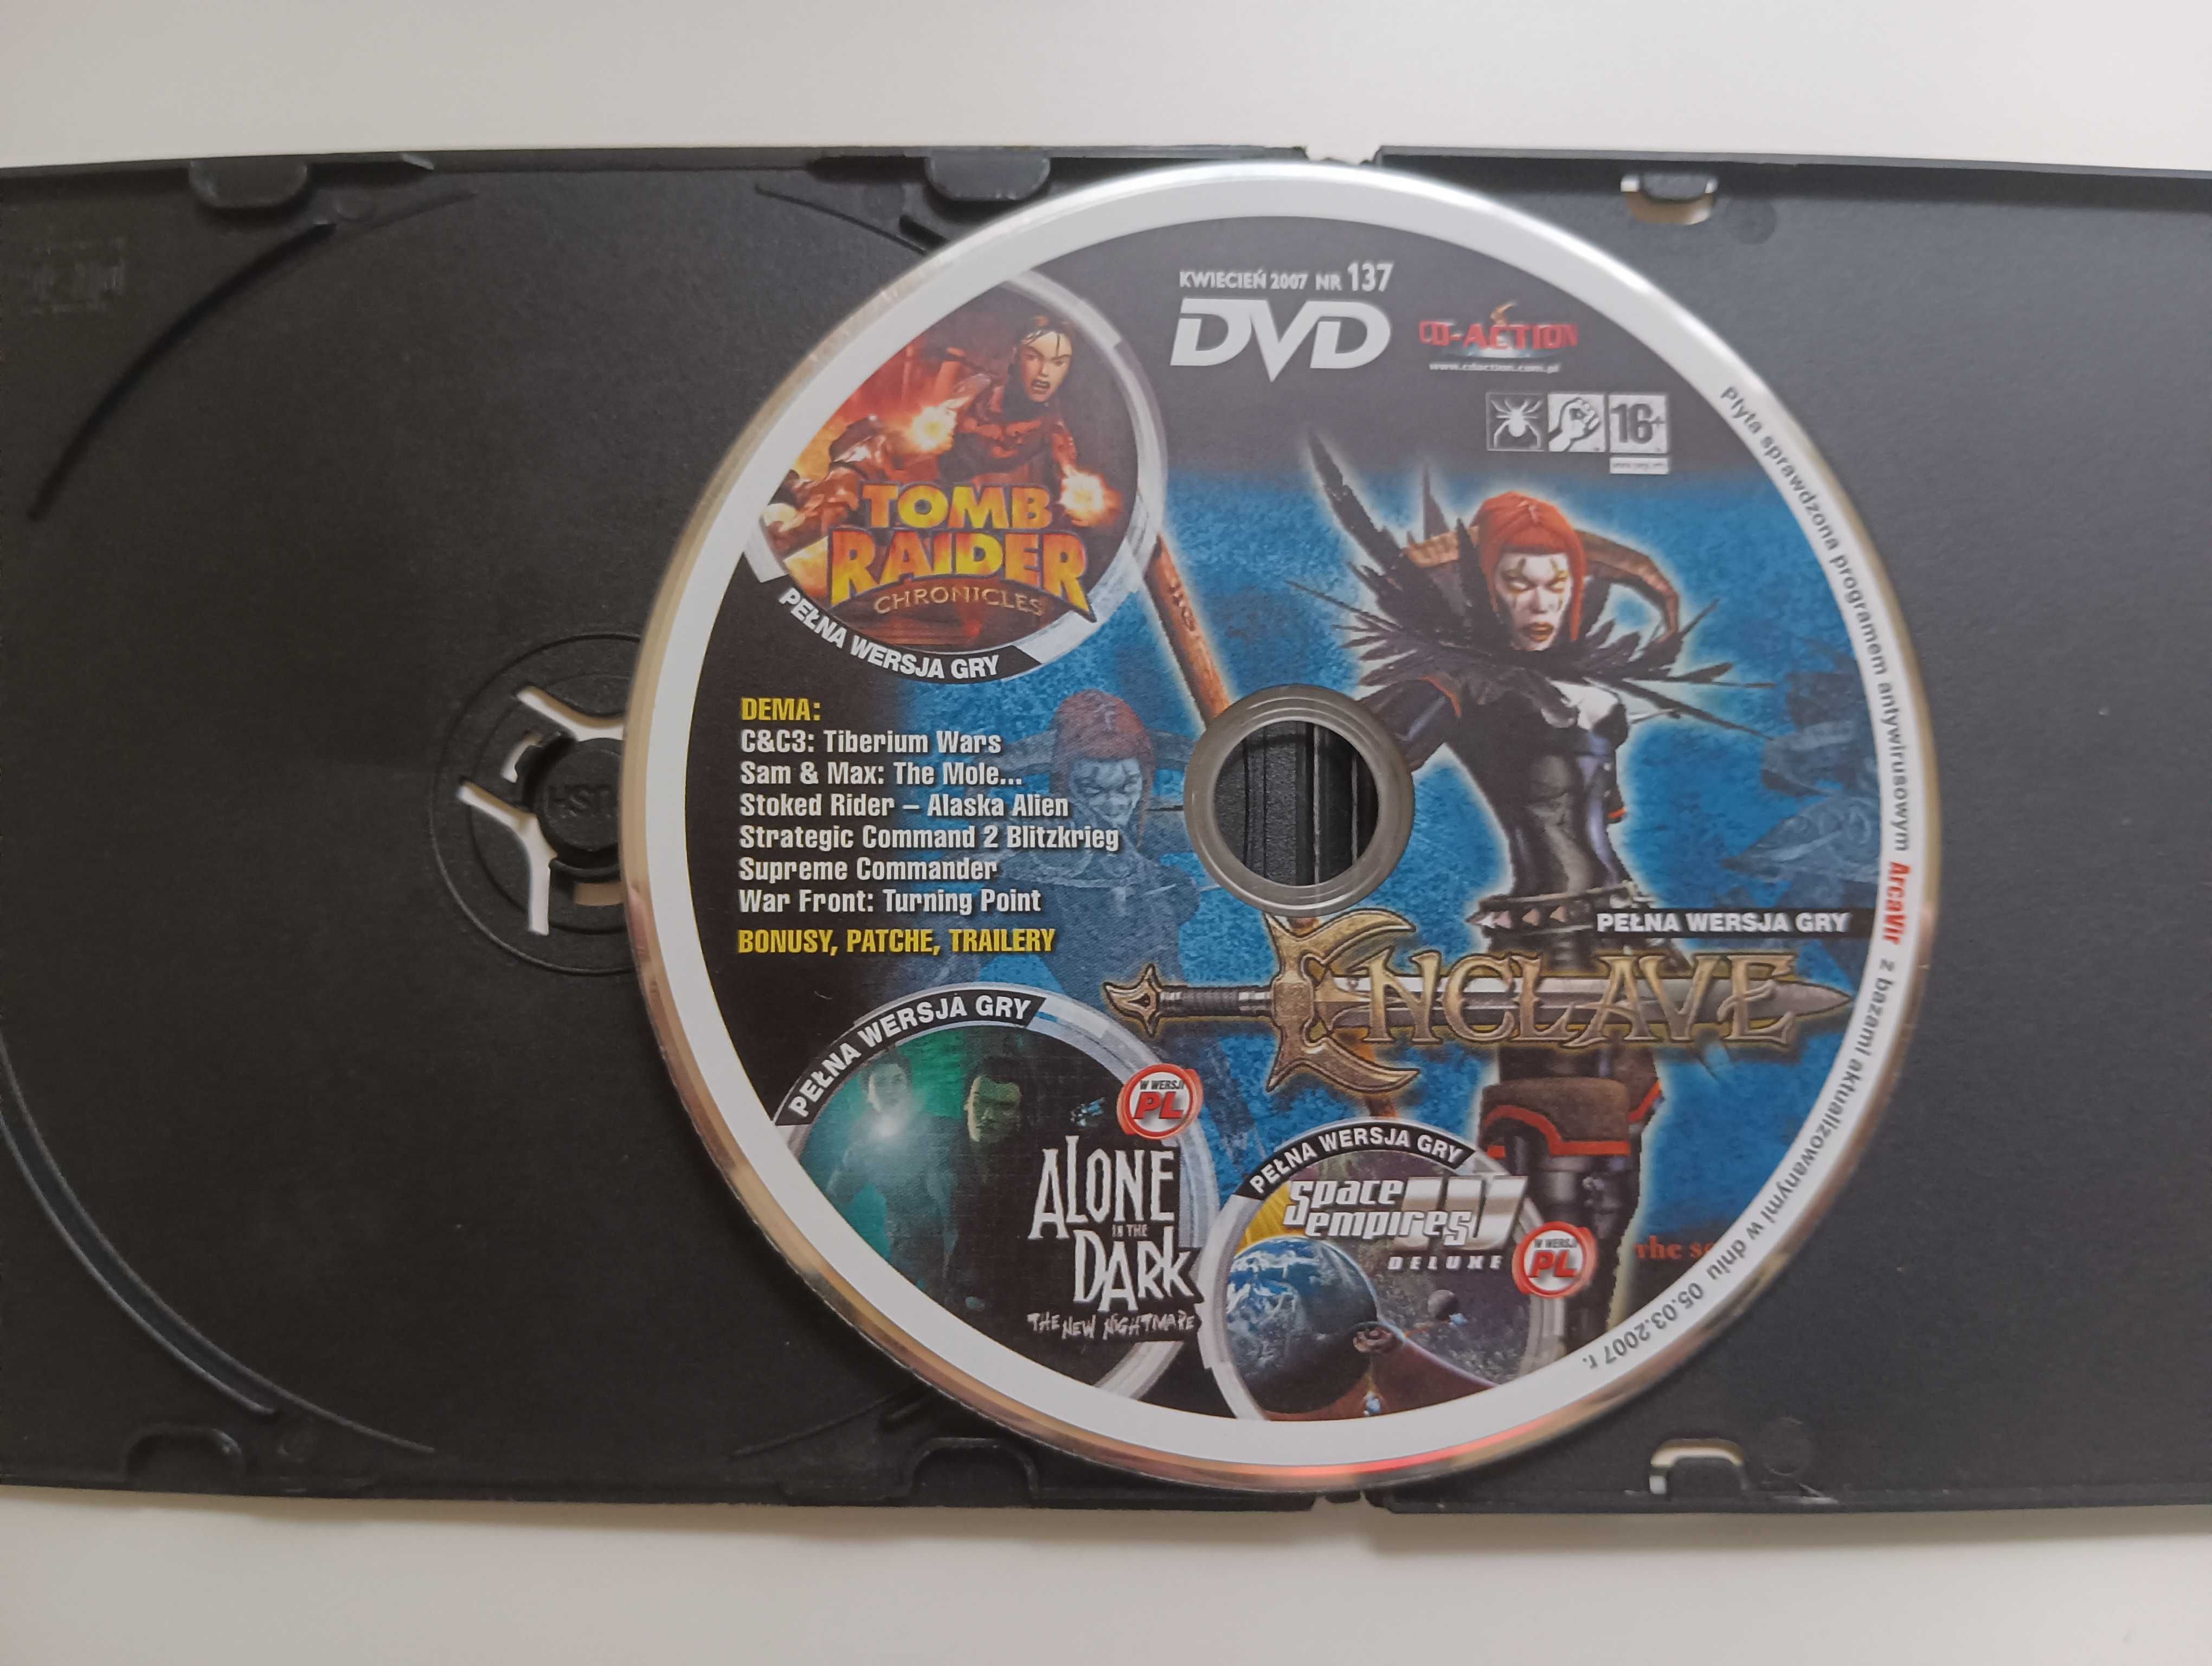 CD Action Alone in the dark 4 + Enclave + Tomb Raider: Chronicles